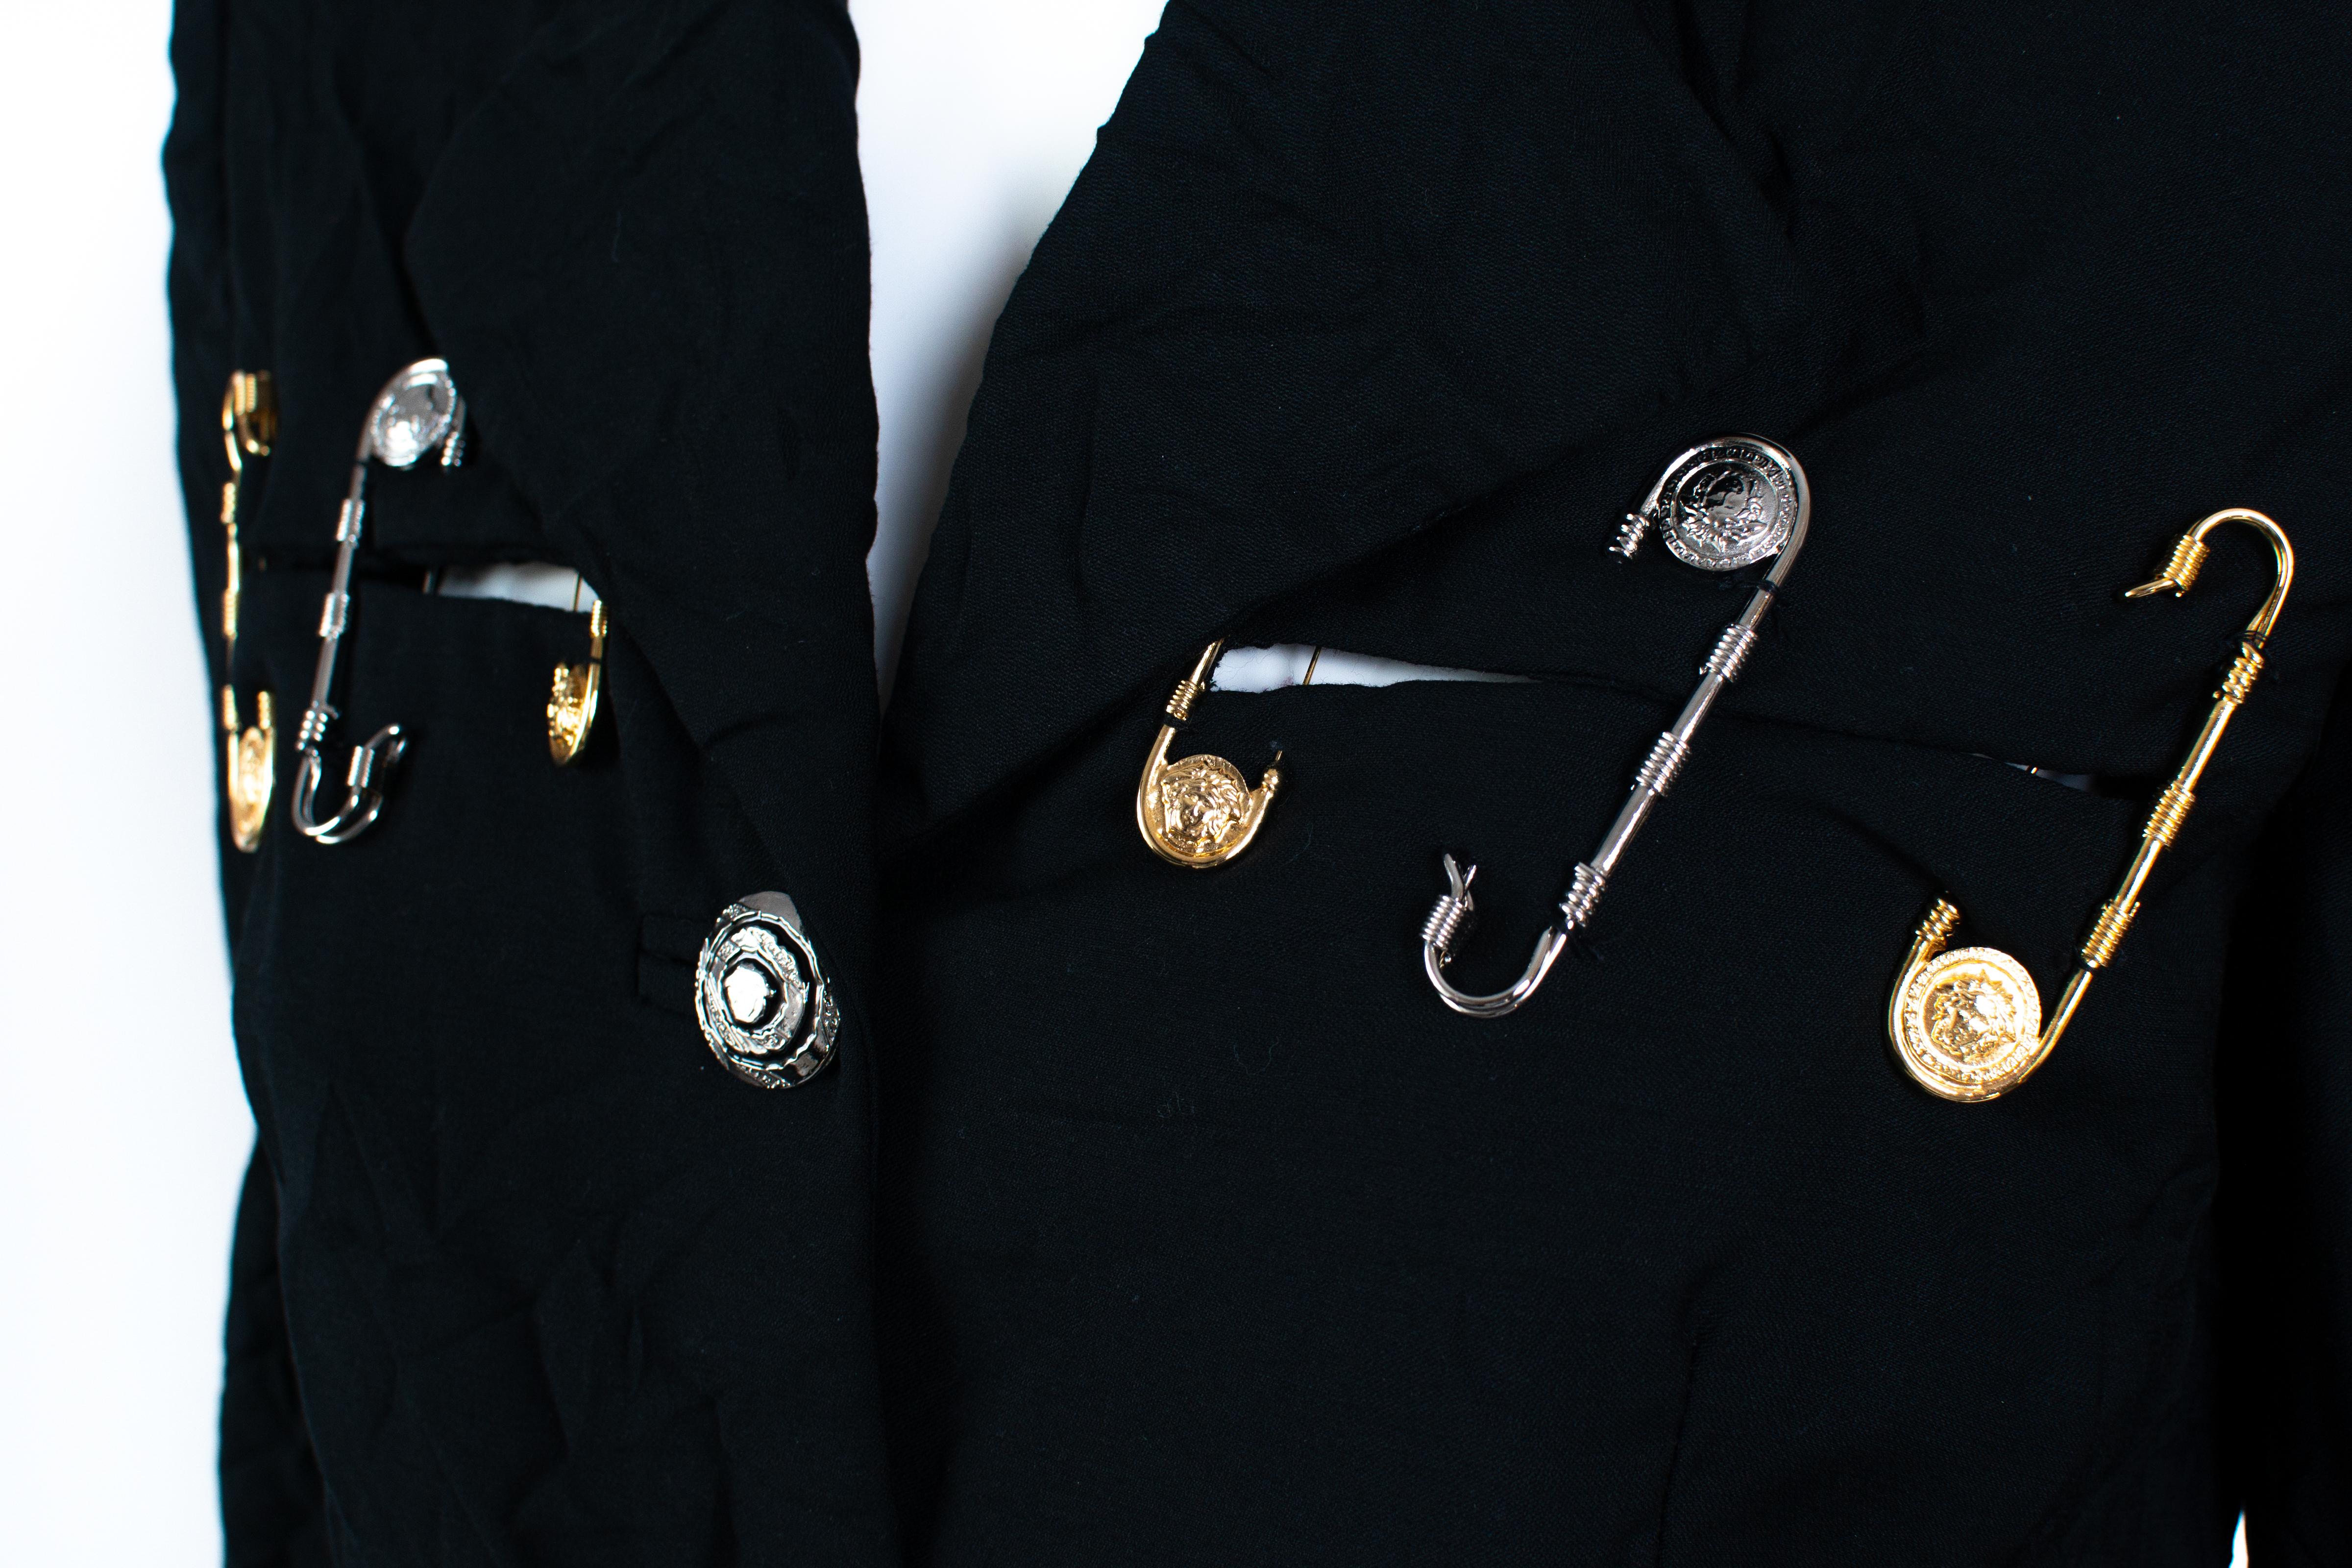 S/S 1994 Gianni Versace Couture Medusa Safety Pin Blazer Runway  In Good Condition For Sale In West Hollywood, CA